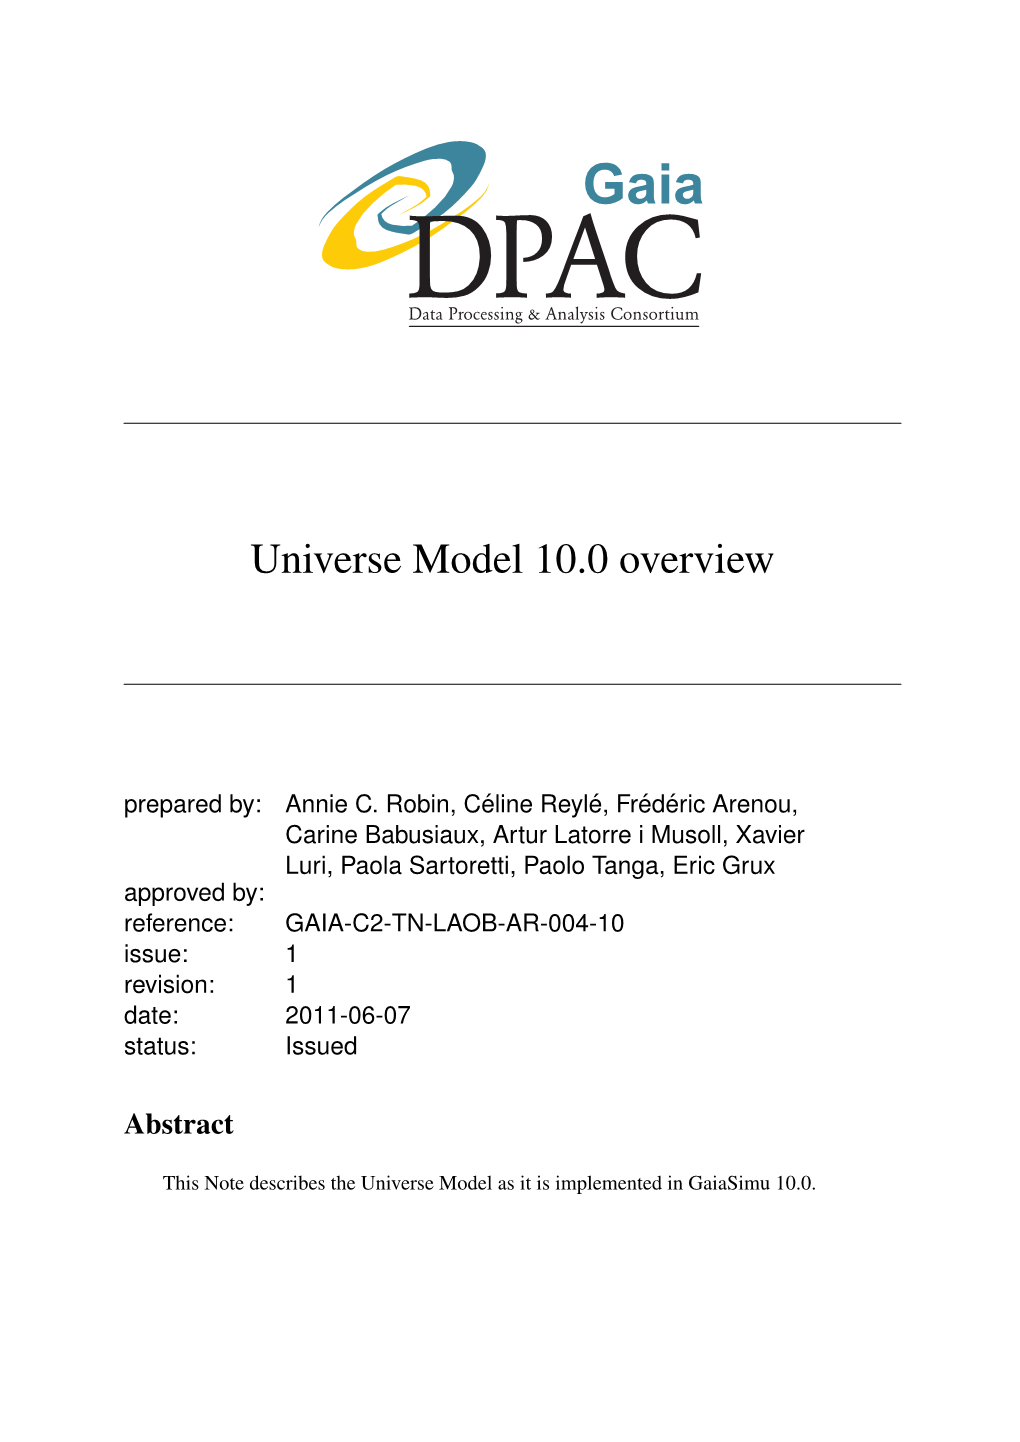 Universe Model 10.0 Overview